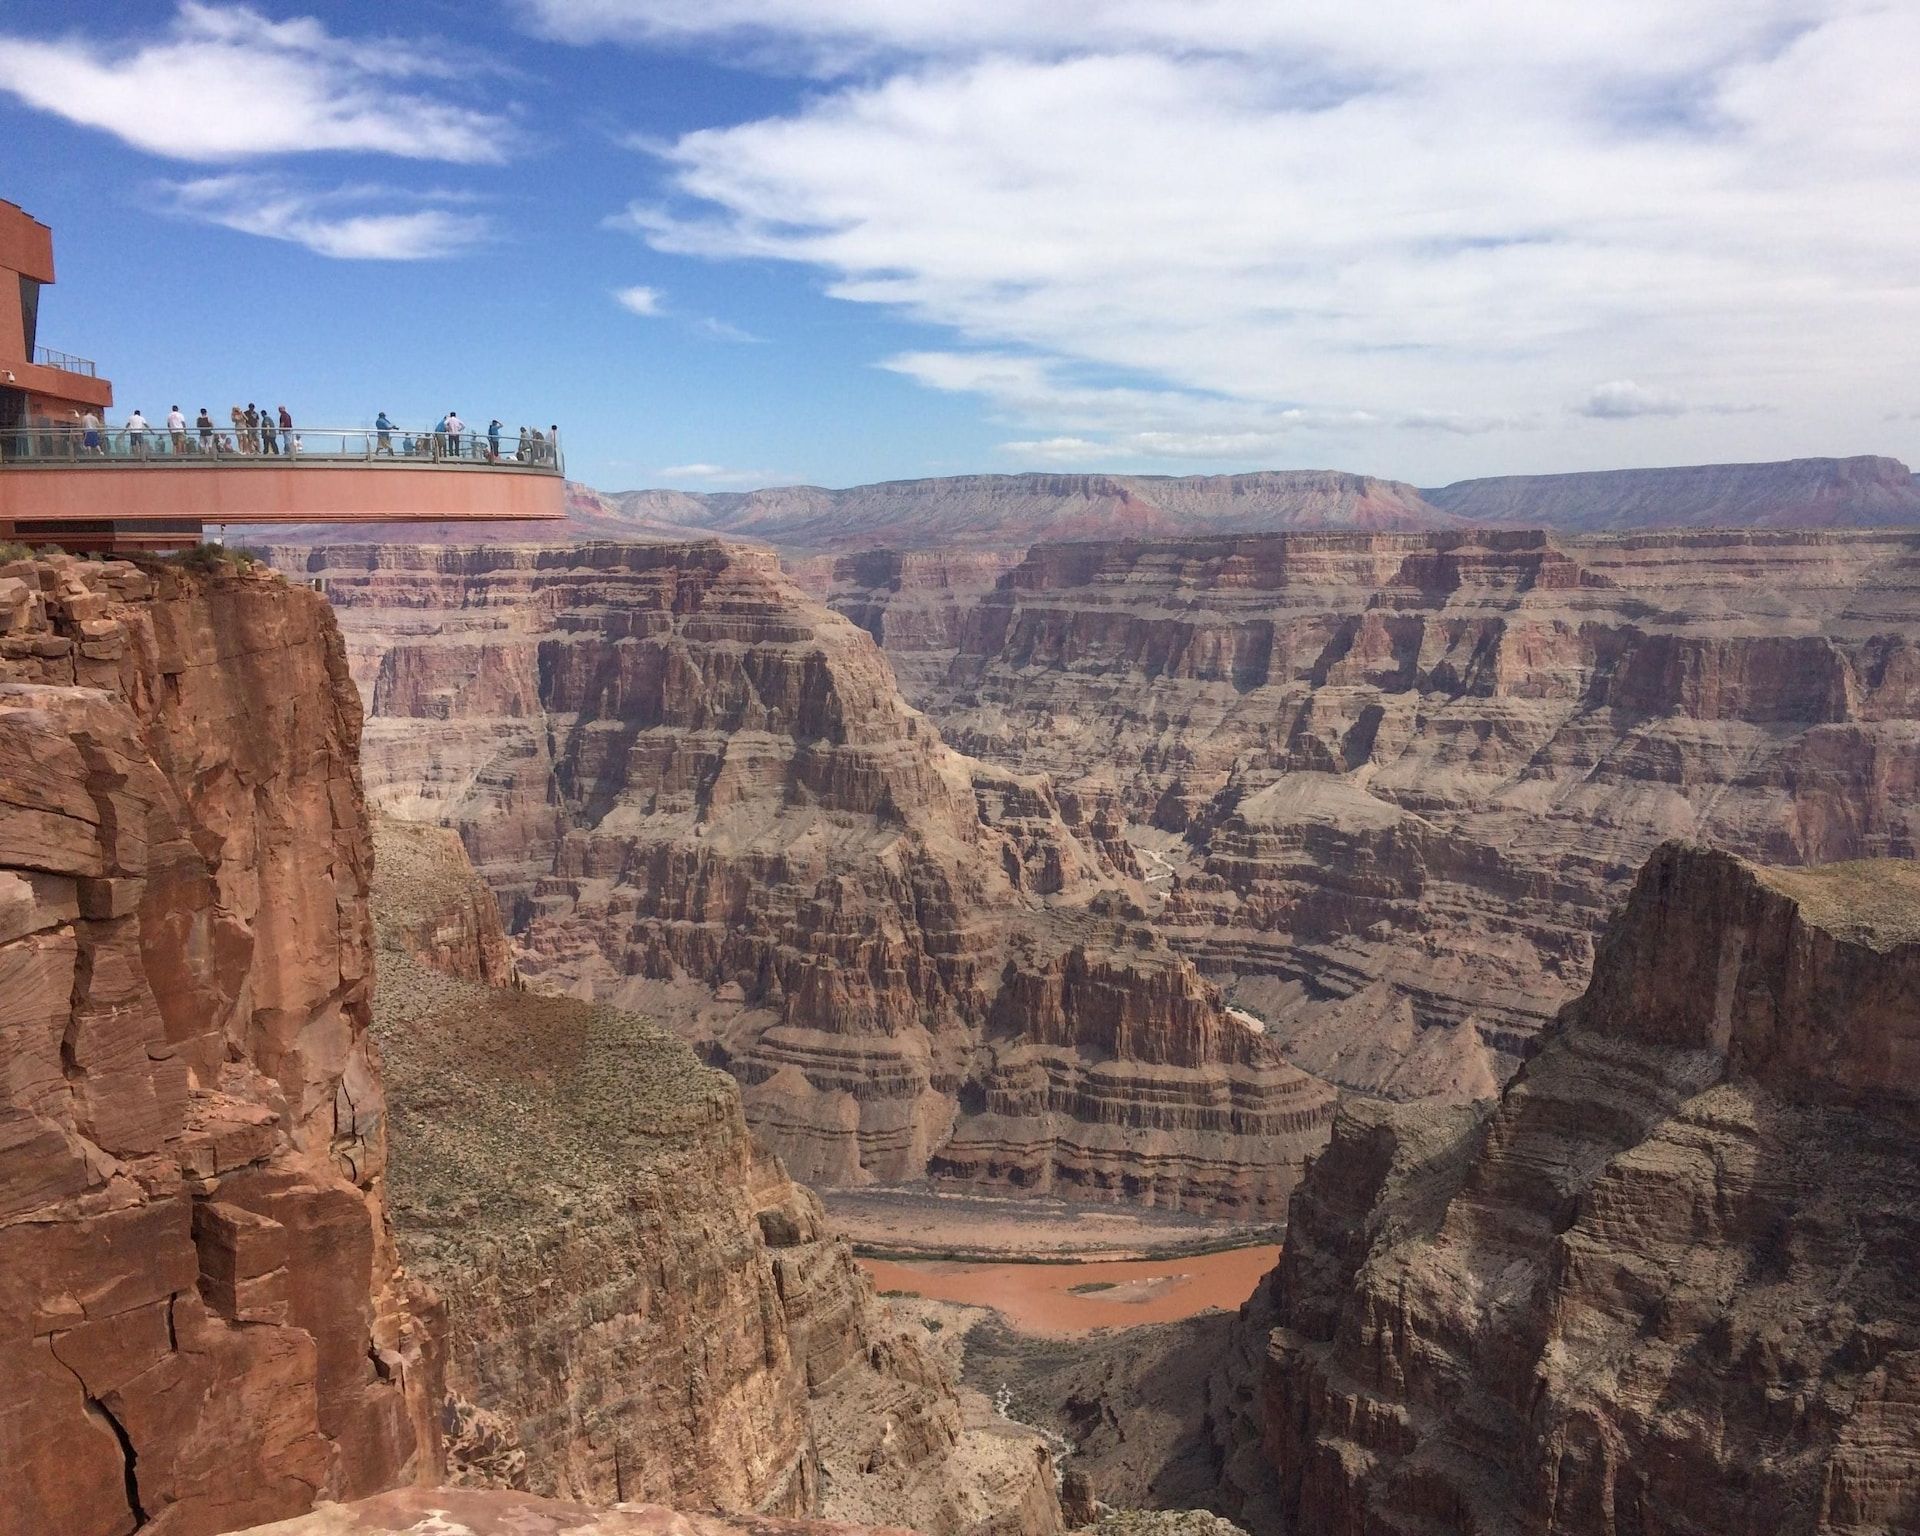 The iconic Grand Canyon Skywalk towers high above the canyon's floor